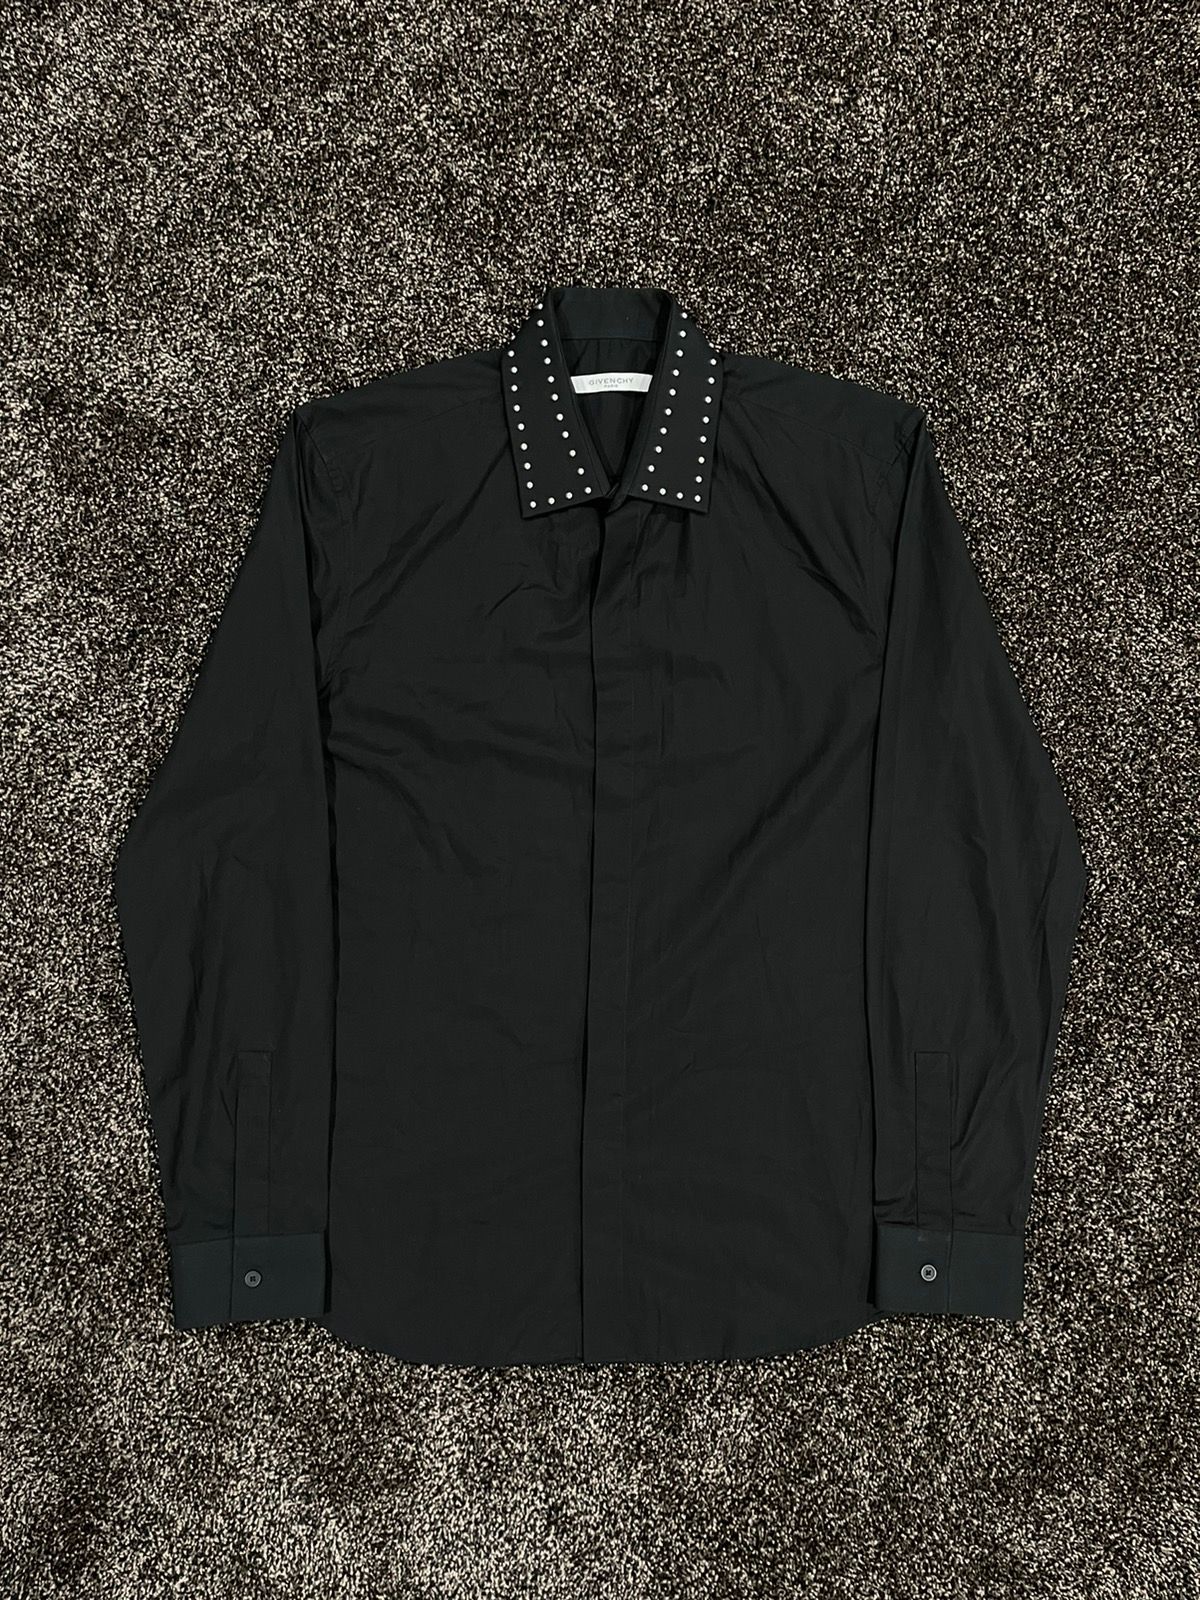 Pre-owned Givenchy Studded Black Button Up Long Sleeve Black Shirt